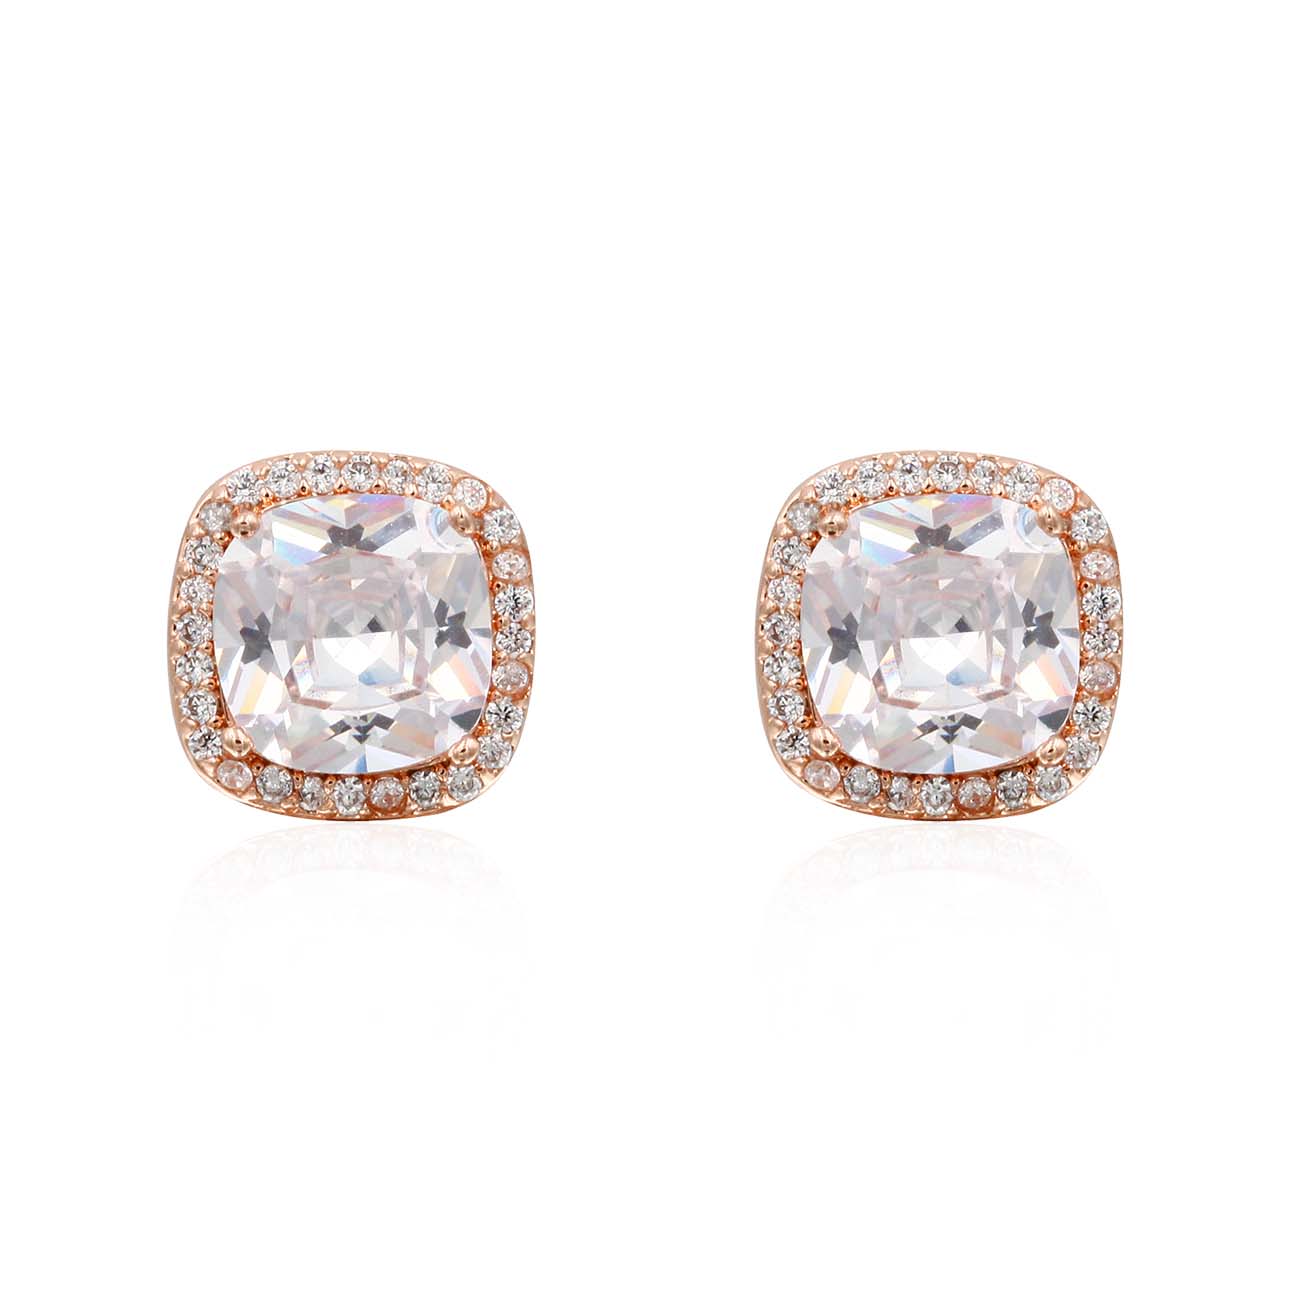 Princess Cut with Micro Paved AAA Clear Cubic Zirconia Stud Earrings